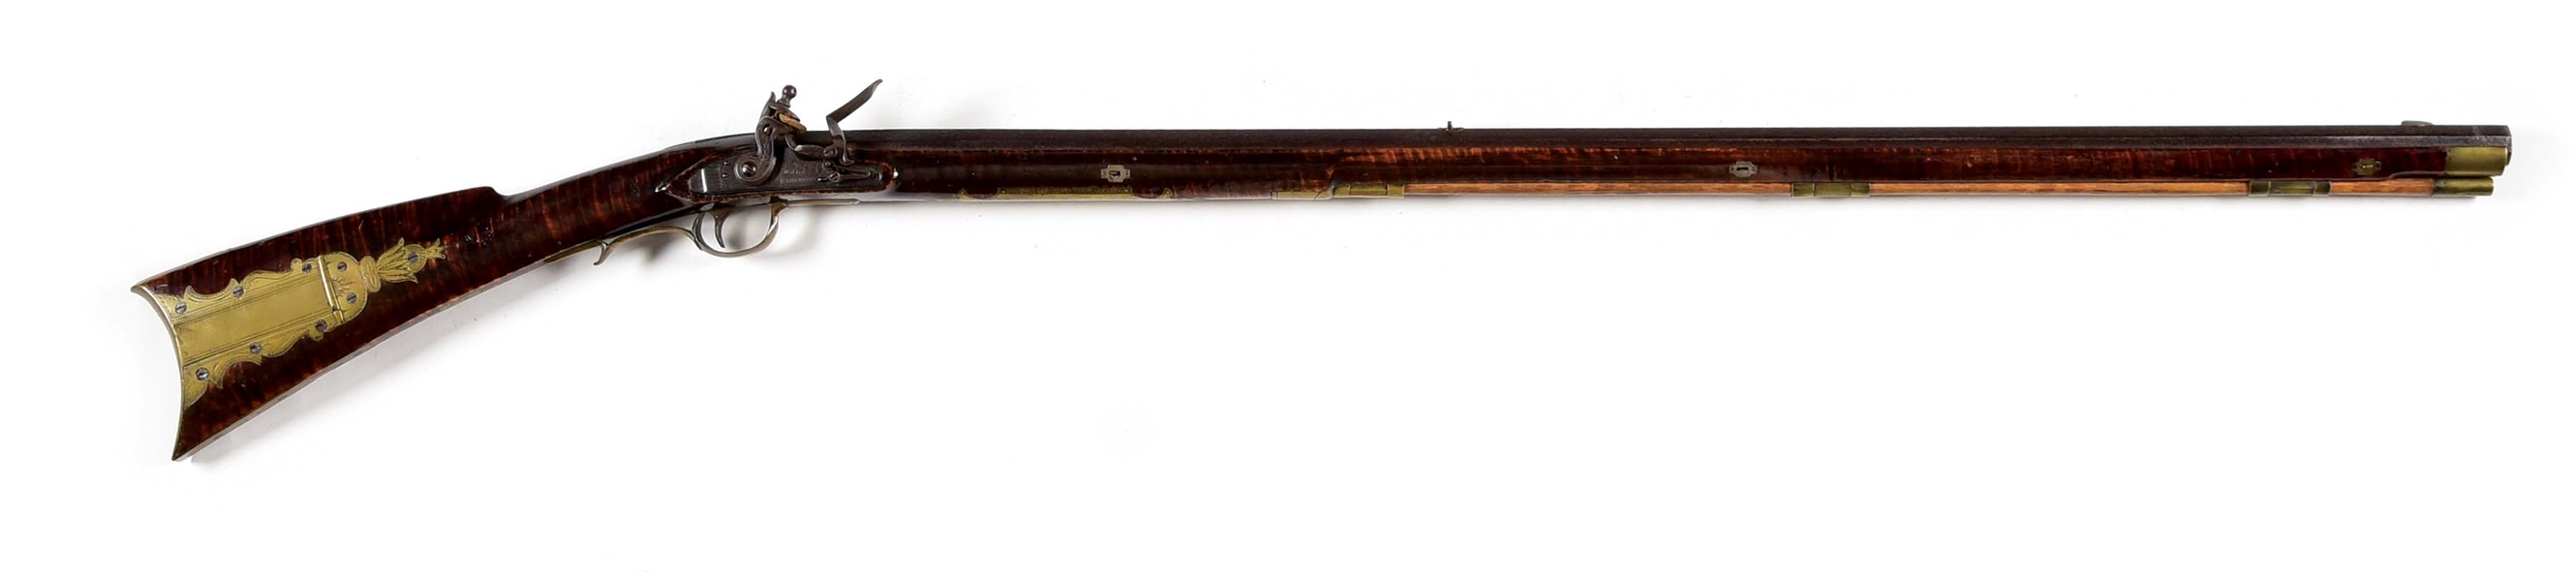 (A) FLINTLOCK KENTUCKY RIFLE SIGNED "PY" FOR PETER YOUNG.